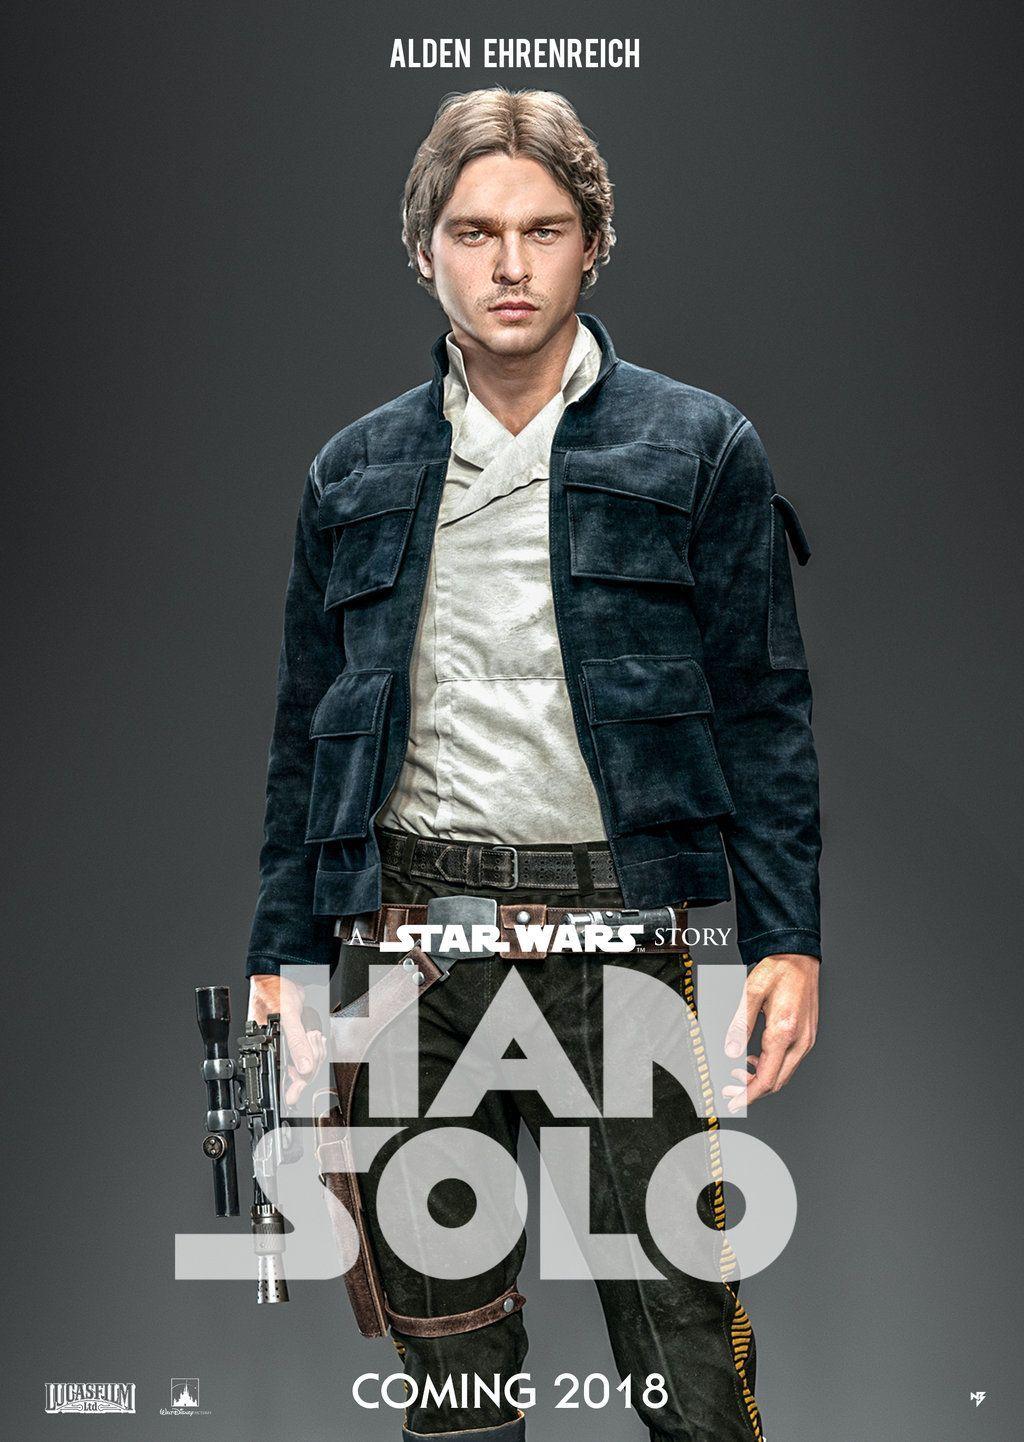 Han Solo (2018) Poster Ehrenreich HD Wallpaper From